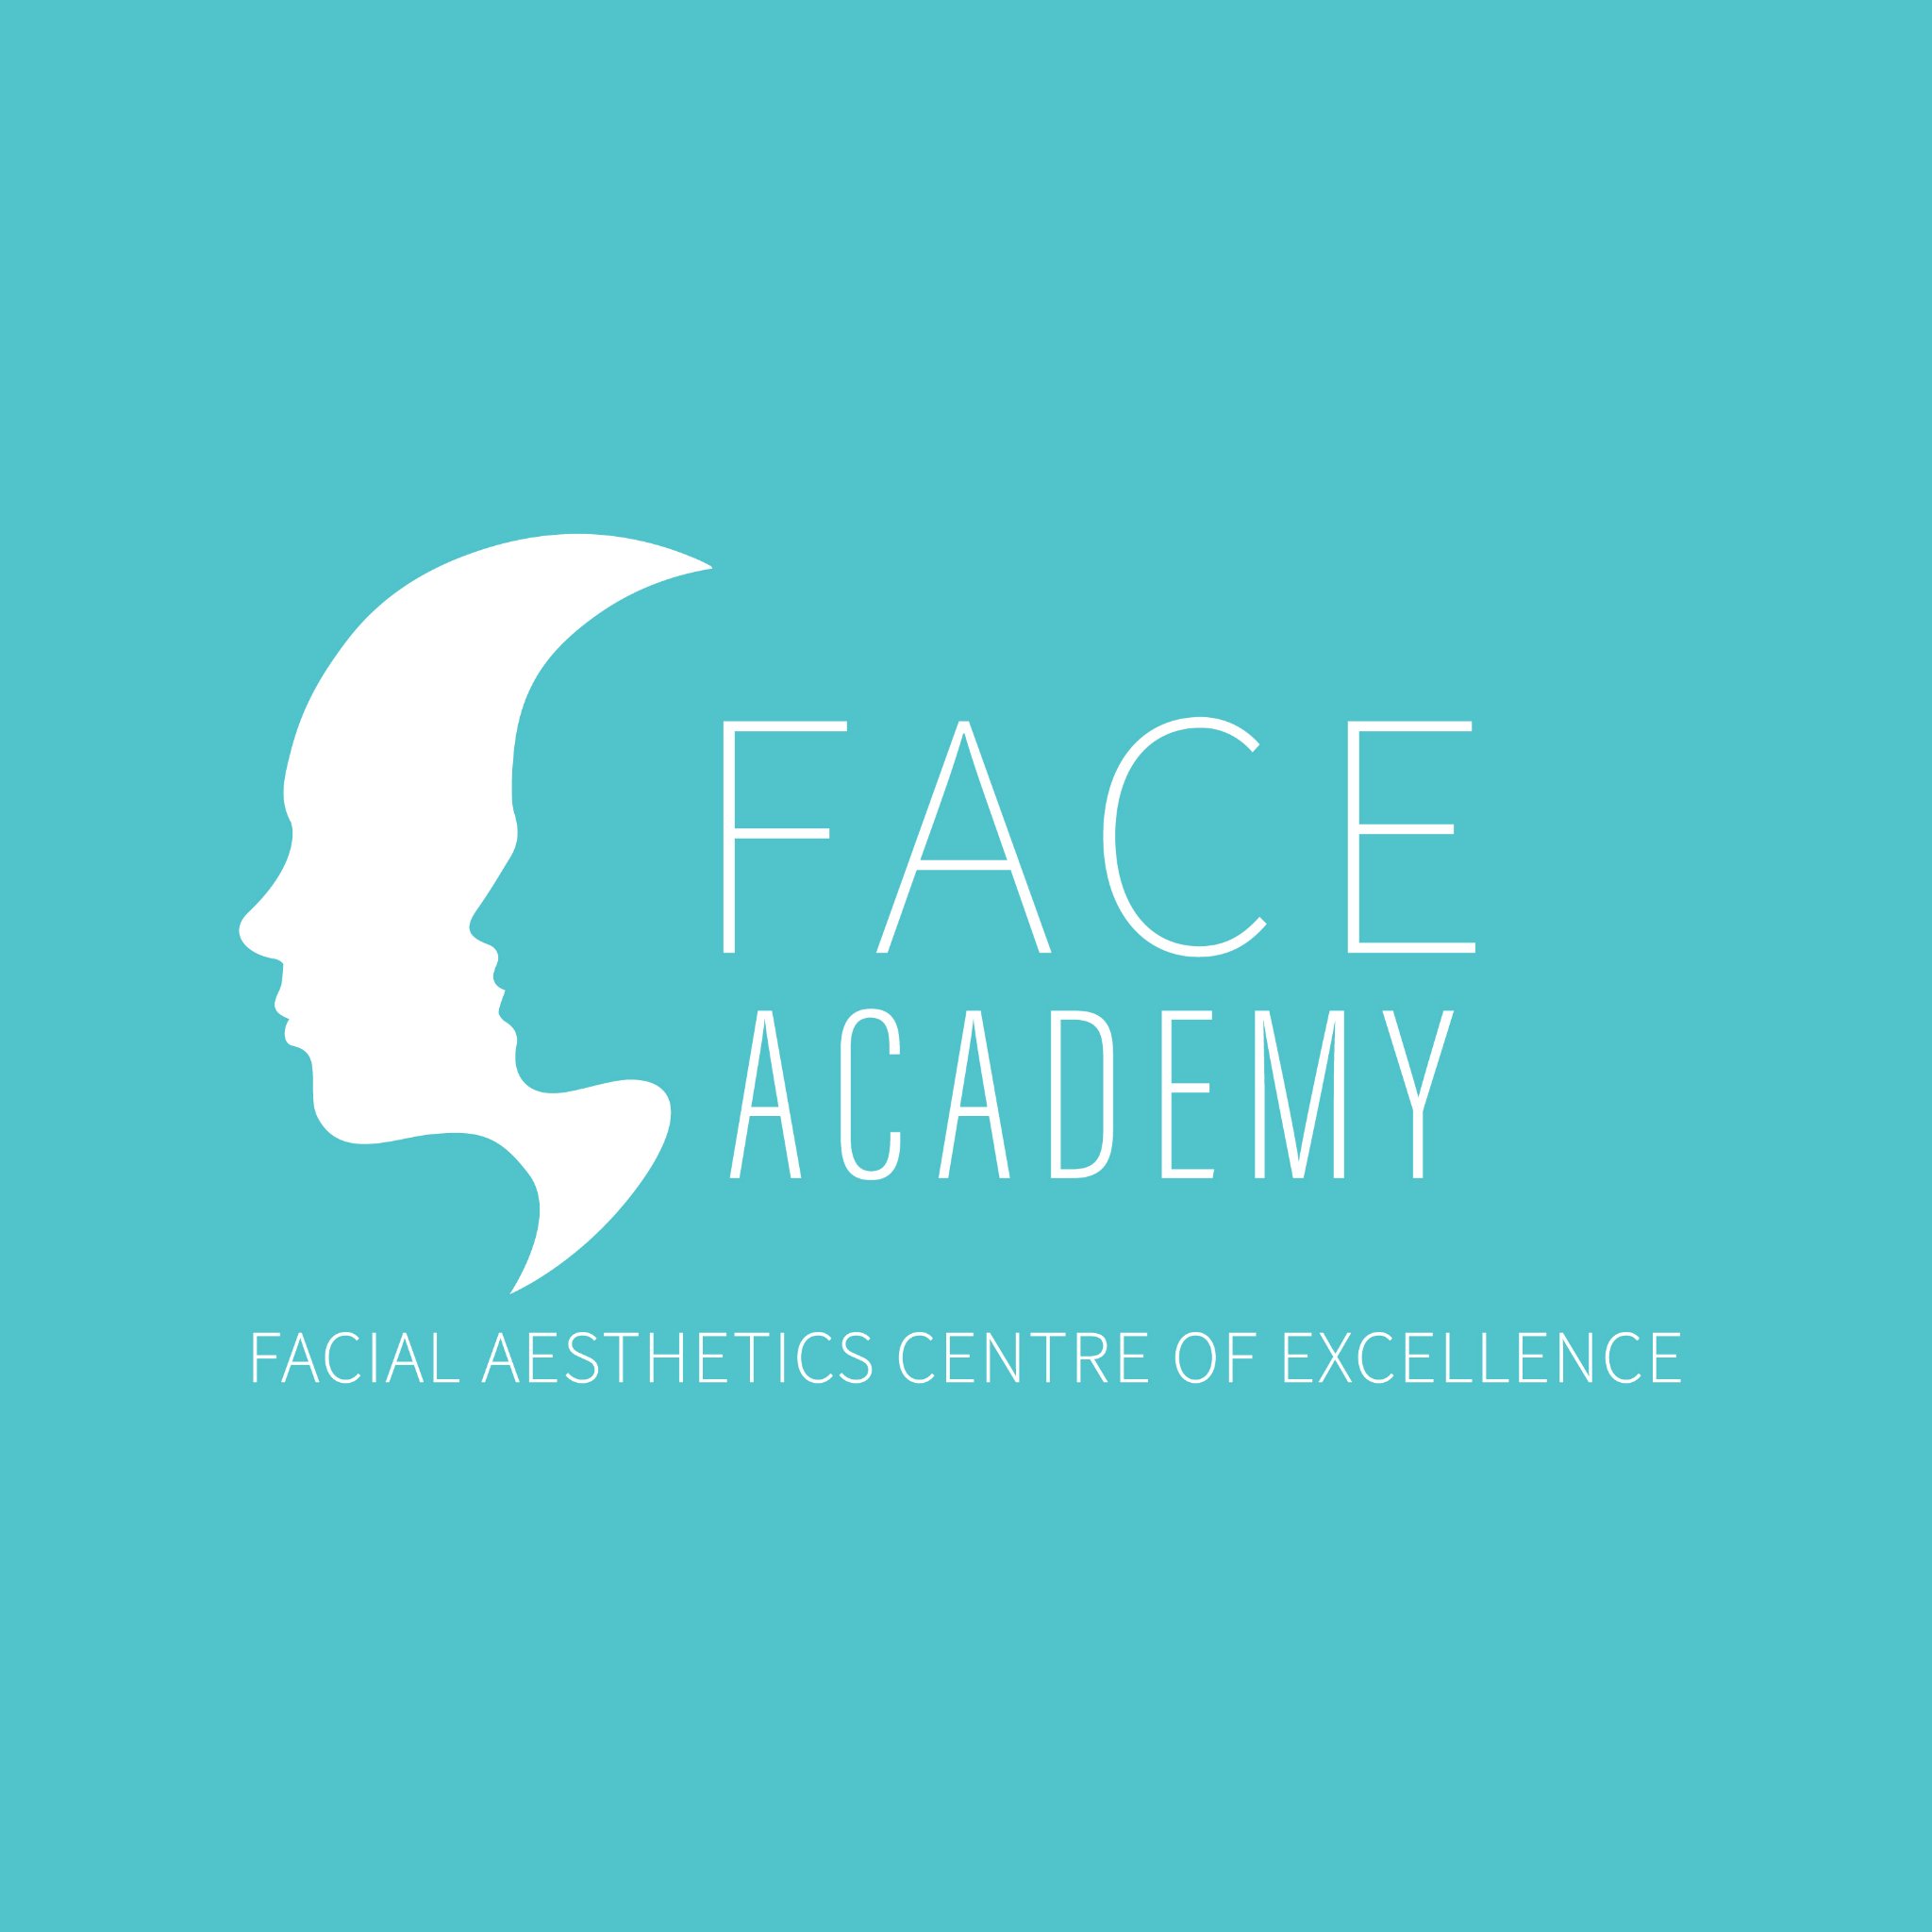 Facial Aesthetics Centre of Excellence. An independent, purpose built #training facility for #facialaesthetic treatments.